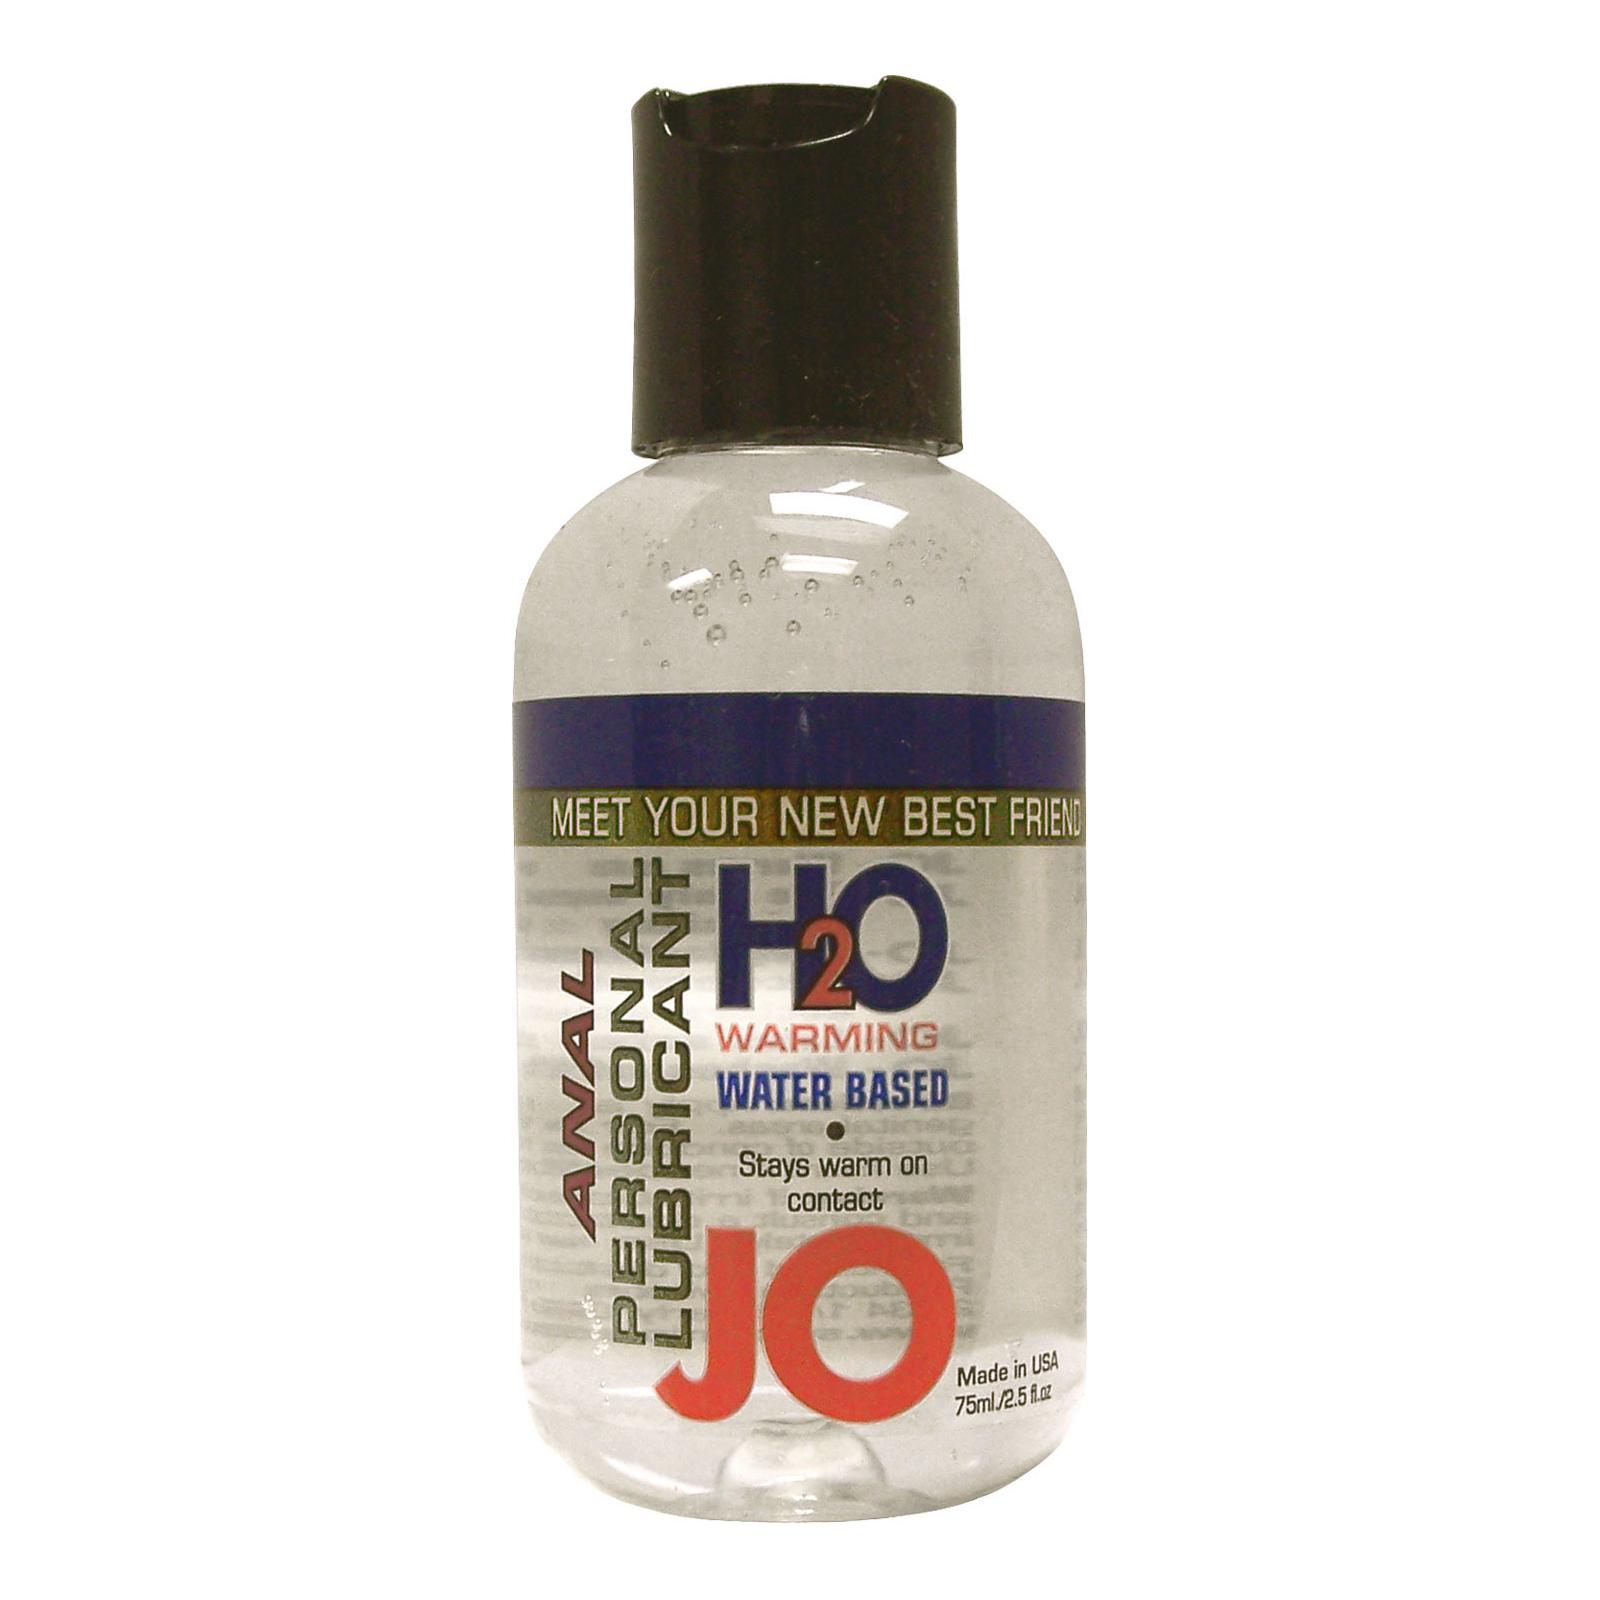 System Jo Personal Anal Water Based  Warming Lubricant 2.5 Ounces